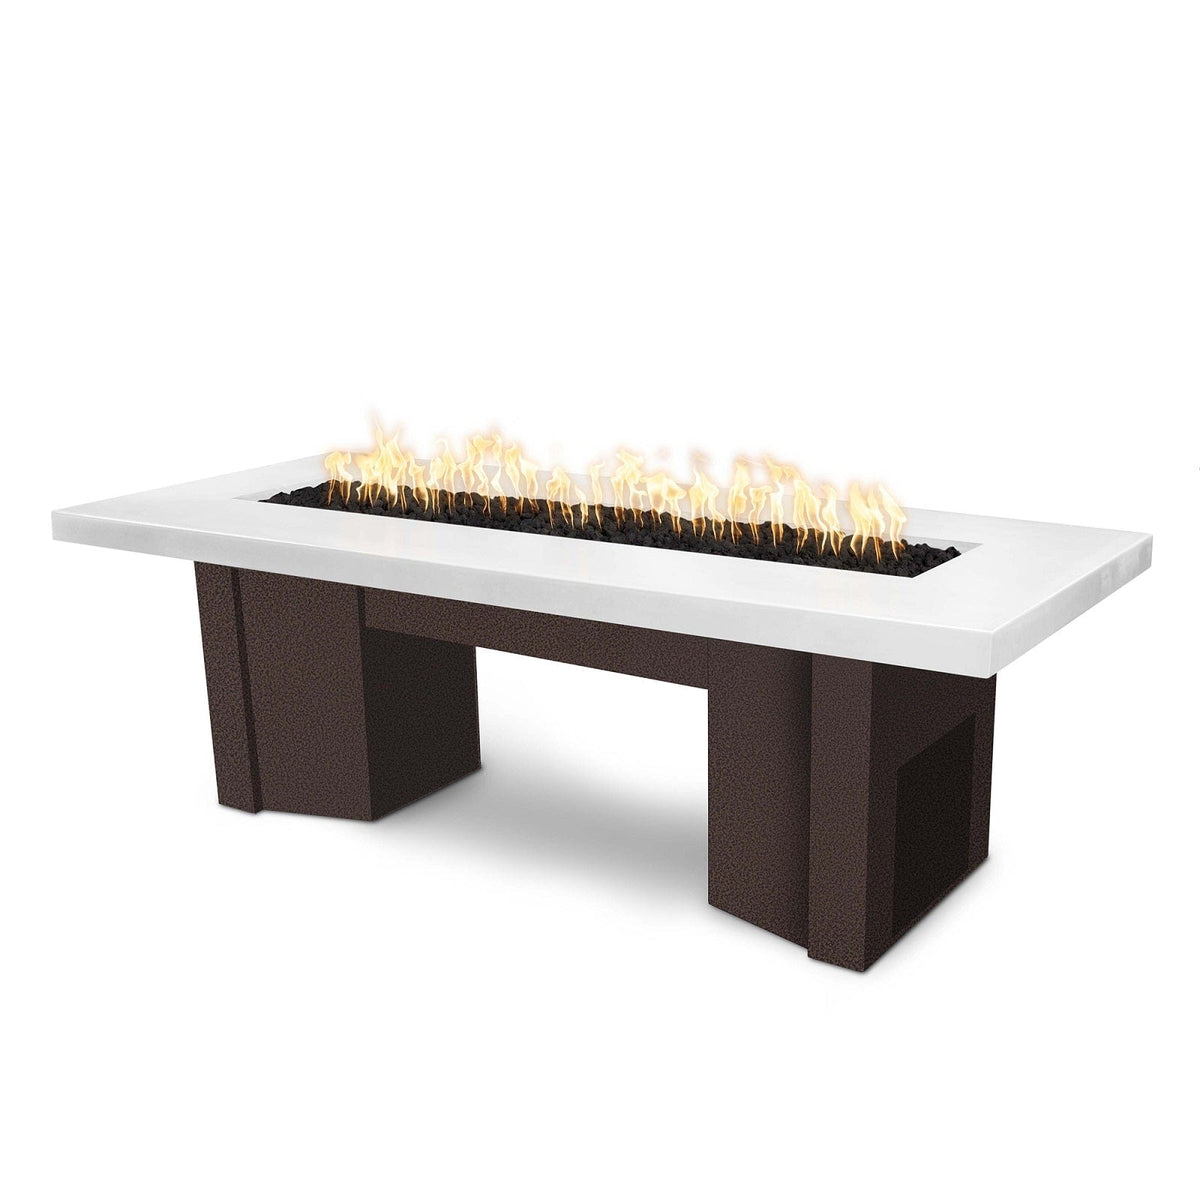 The Outdoor Plus Fire Features Limestone (-LIM) / Copper Vein Powder Coated Steel (-CPV) The Outdoor Plus 78&quot; Alameda Fire Table Smooth Concrete in Natural Gas - 110V Plug &amp; Play Electronic Ignition / OPT-ALMGFRC78EKIT-NG